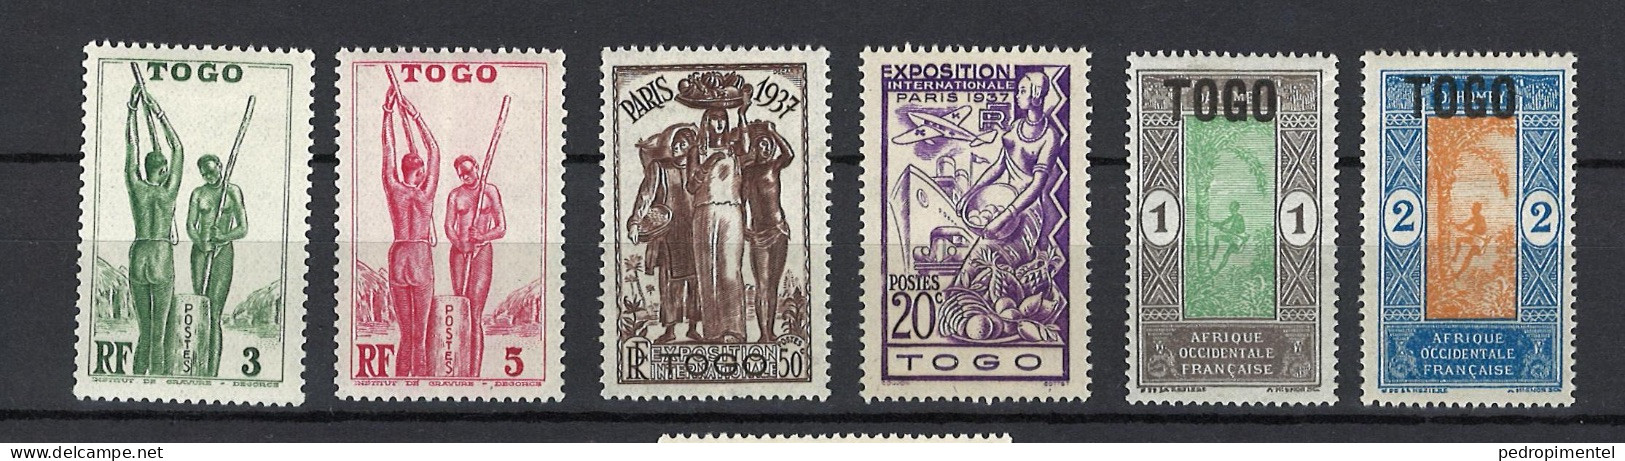 Togo Stamps | 25 Stamps | MH - Unused Stamps